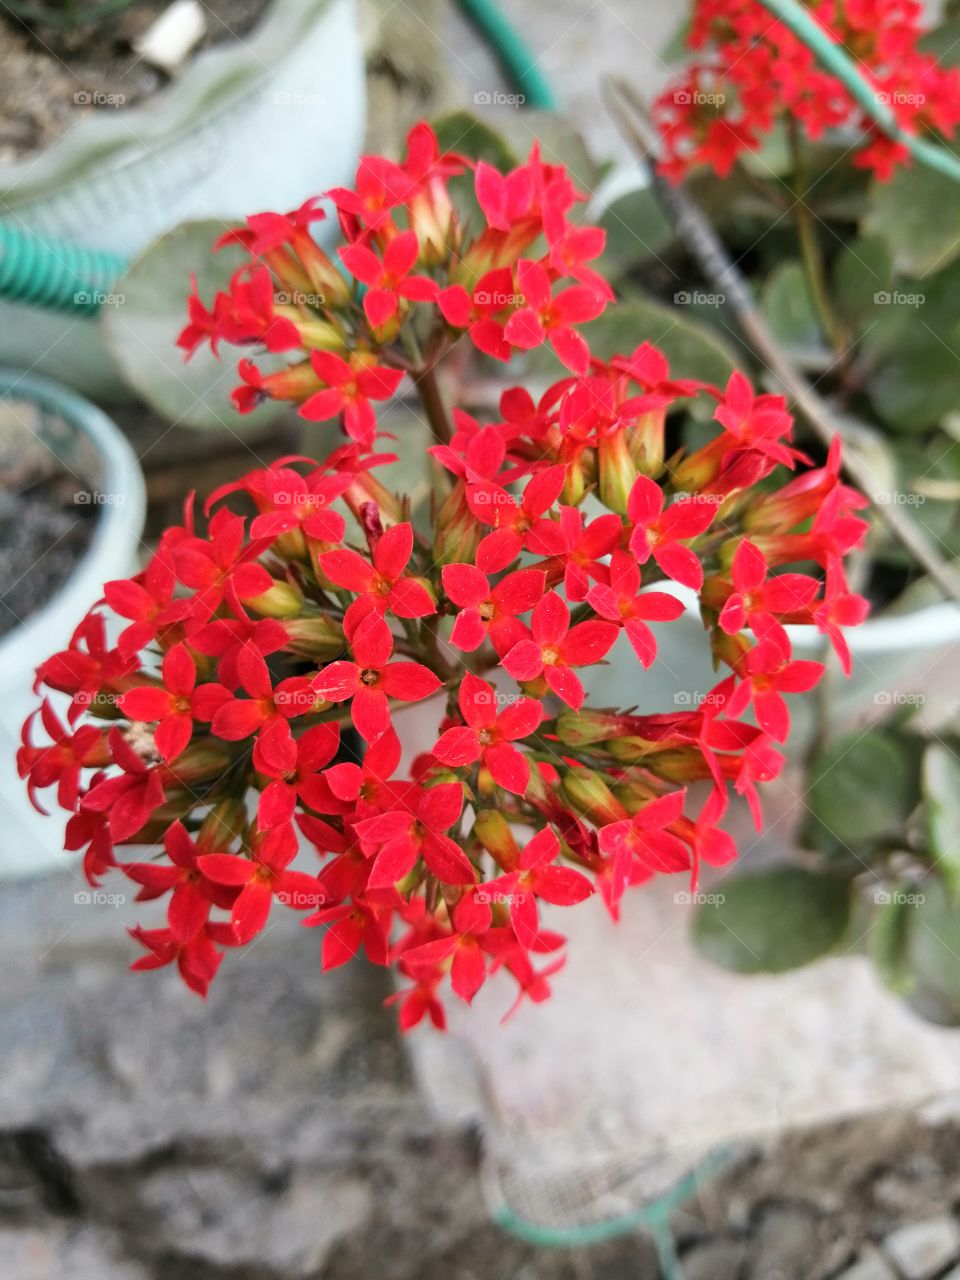 Portrait of a plant. Beautiful picture of red flowers along with plants.